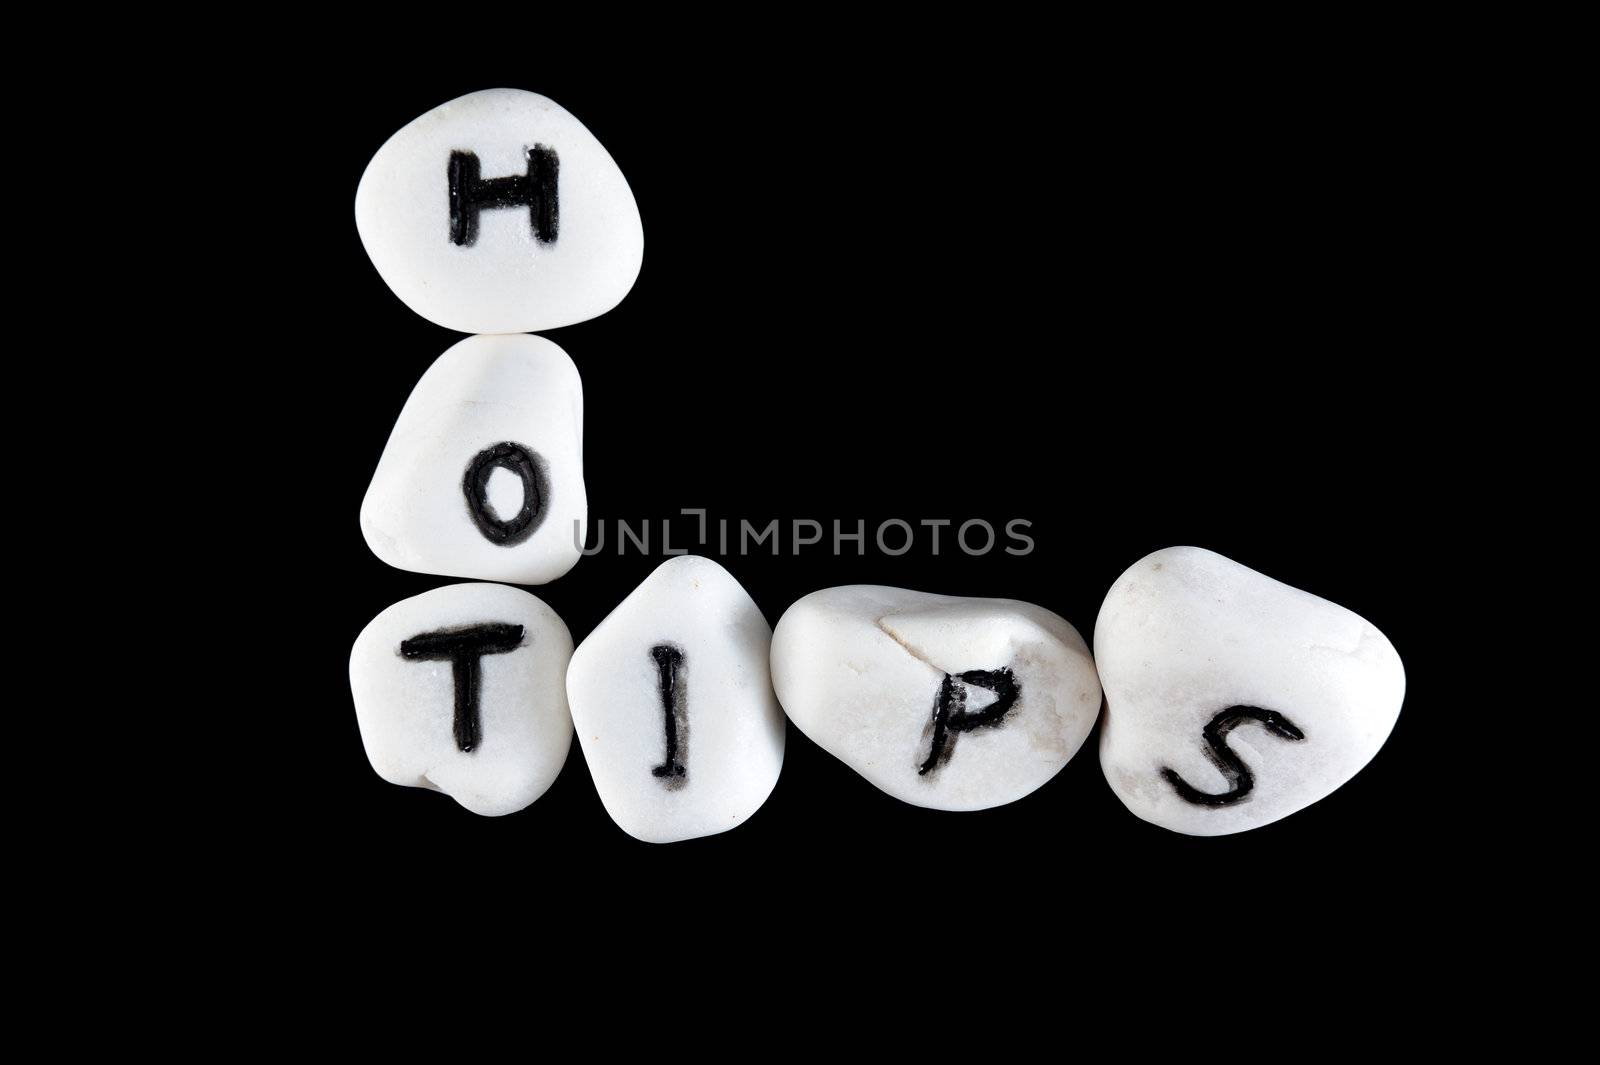 Hot tips words carved on group of stones